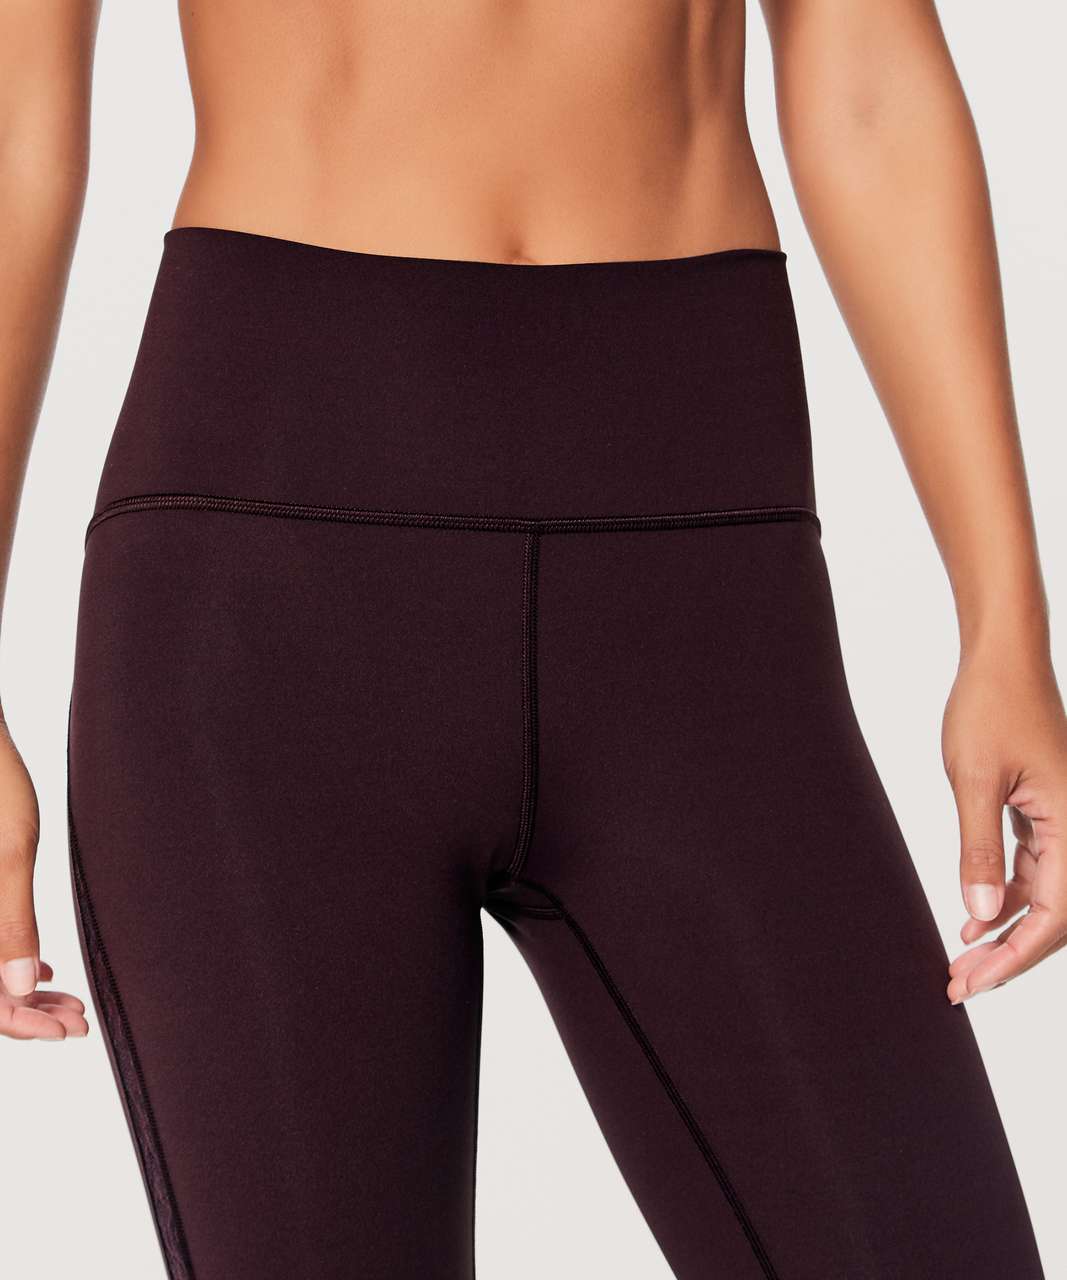 Lululemon Meant To Move 7/8 Tight (25) - Black Cherry / Flocked